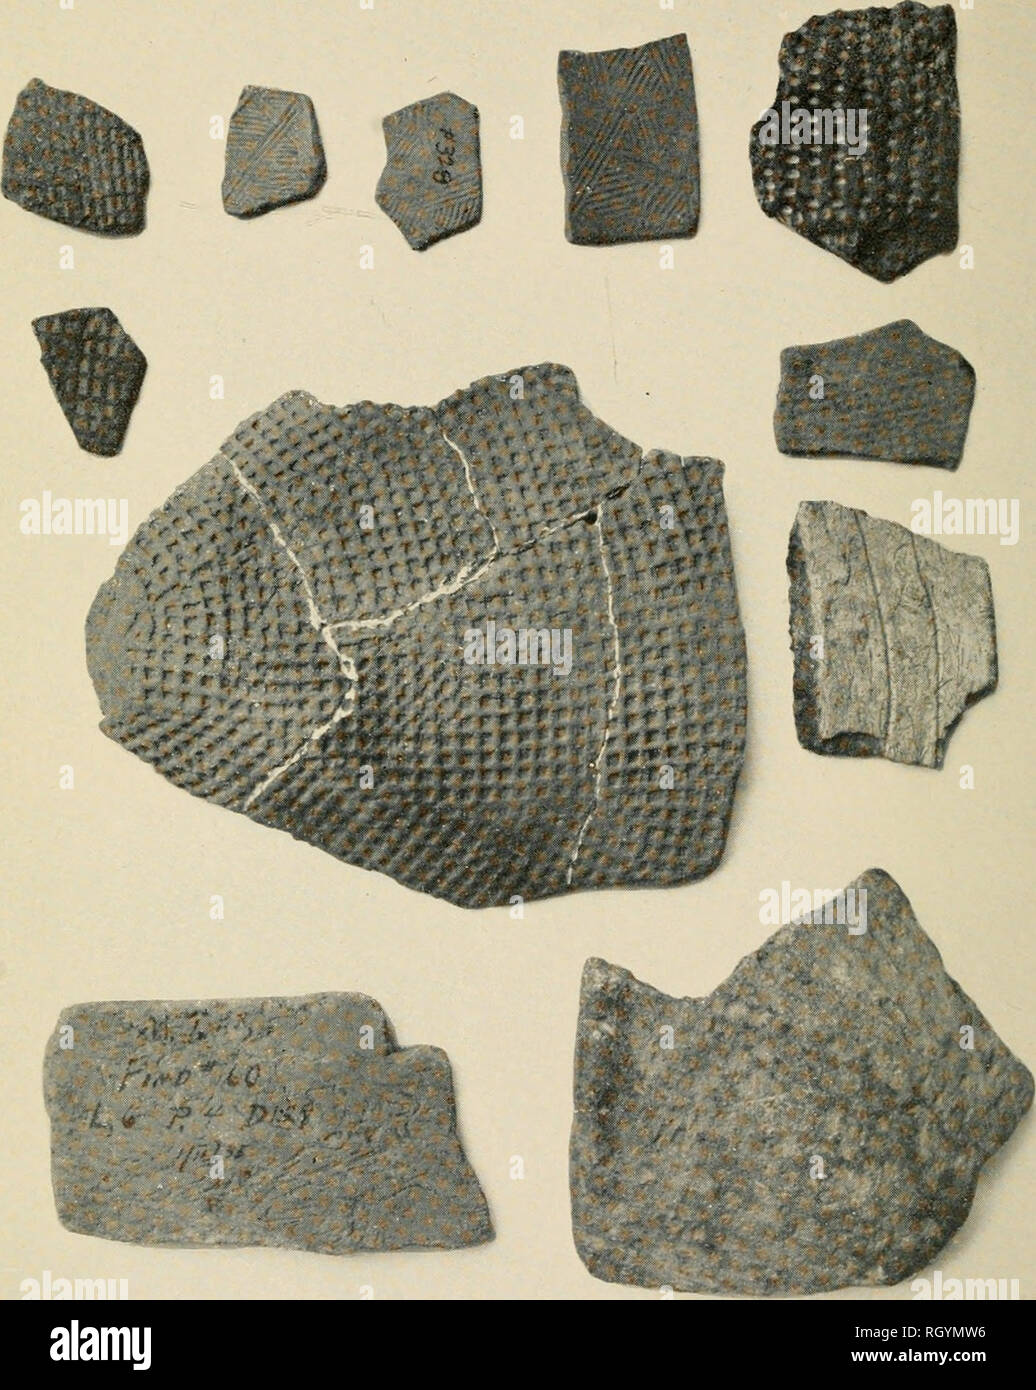 . Bulletin. Ethnology. BUREAU OF AMERICAN ETHNOLOGY BULLETIN 119 PLATE 10. A group of sherds representing the important minority wares which act as site markers and help to establish relative chronological position in central Georgia. Top: Two checker stamps and three sherds of Delta complicated ware. Right, top to bottom: Fiber tempered with punctates in trailed incised lines; checker stamp; fiber tem- pered with simple trailing; piece of steatite bowl. Center: A large side and basal sherd from a conical pot cataloged from Swift Creek. Lower left corner: A typical sherd of plain, fiber-temper Stock Photo